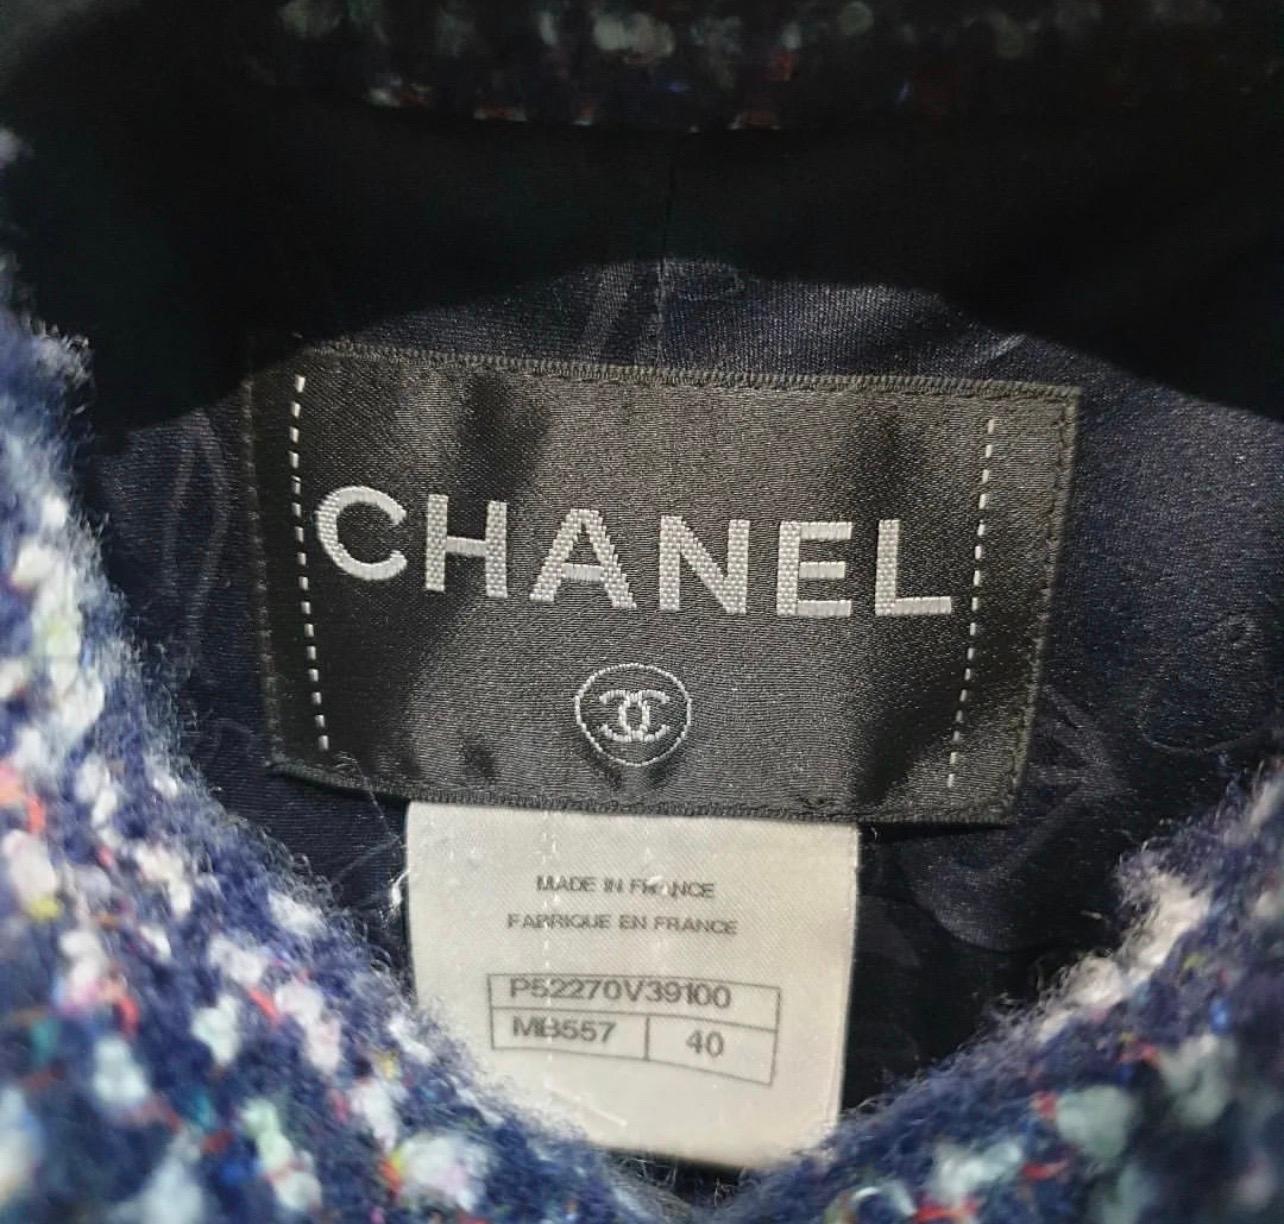 Chanel Blue Tweed Coat In Excellent Condition For Sale In Krakow, PL